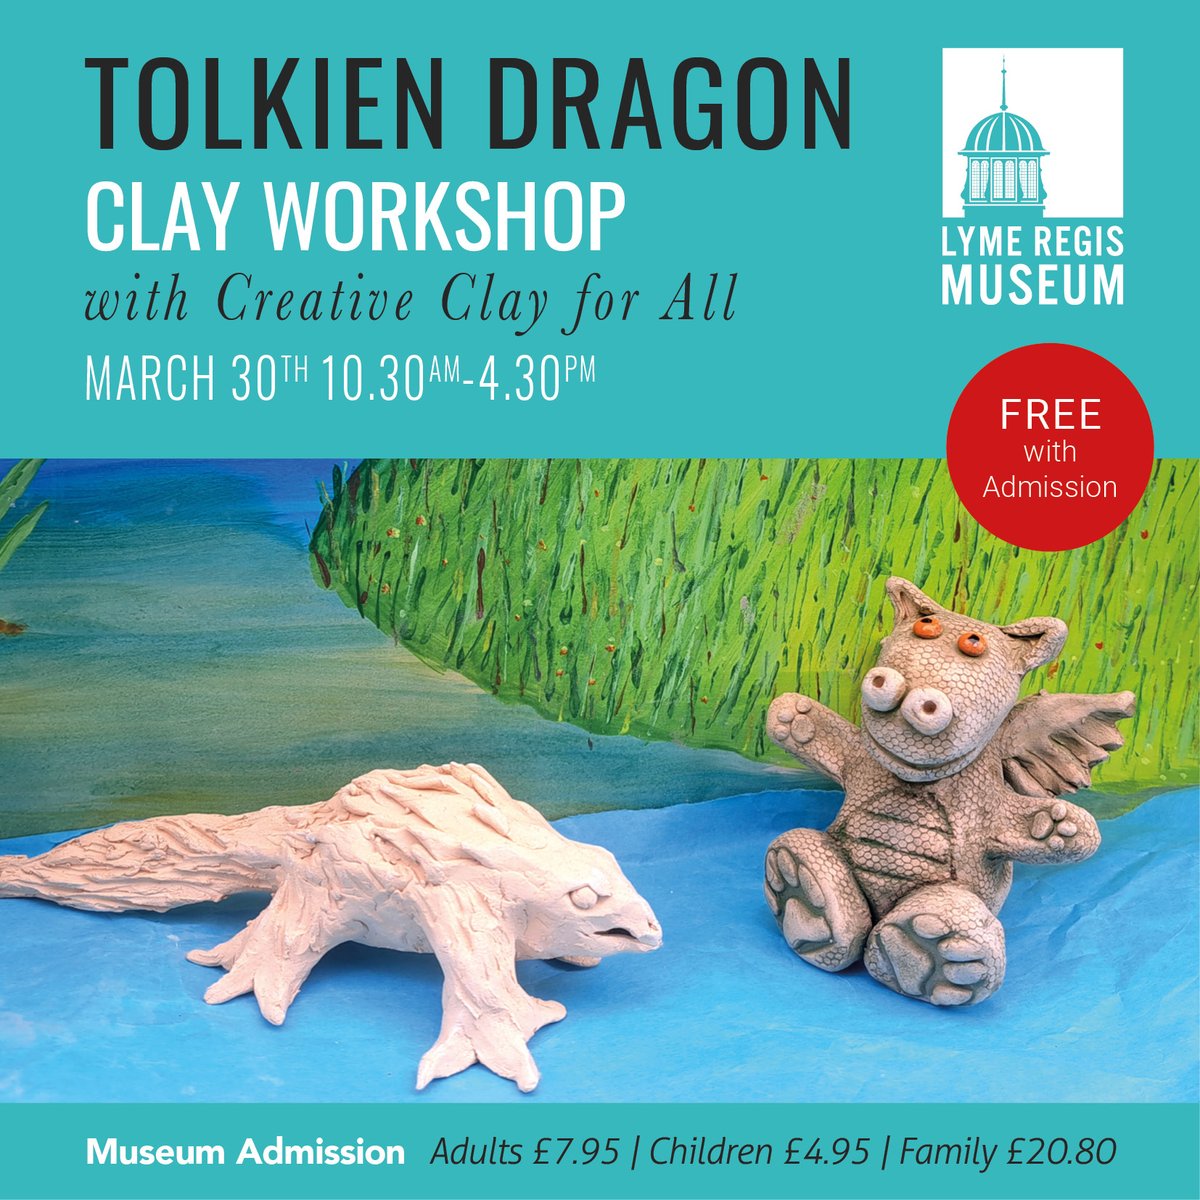 Did you know that J.R.R. Tolkien, author of 'The Lord of the Rings' took inspiration for his drawings and writing from his many holidays in Lyme Regis? Visit the Museum this Easter to learn about Tolkien and have a go at making your own clay dragon, guided by @CreativeClayFor!